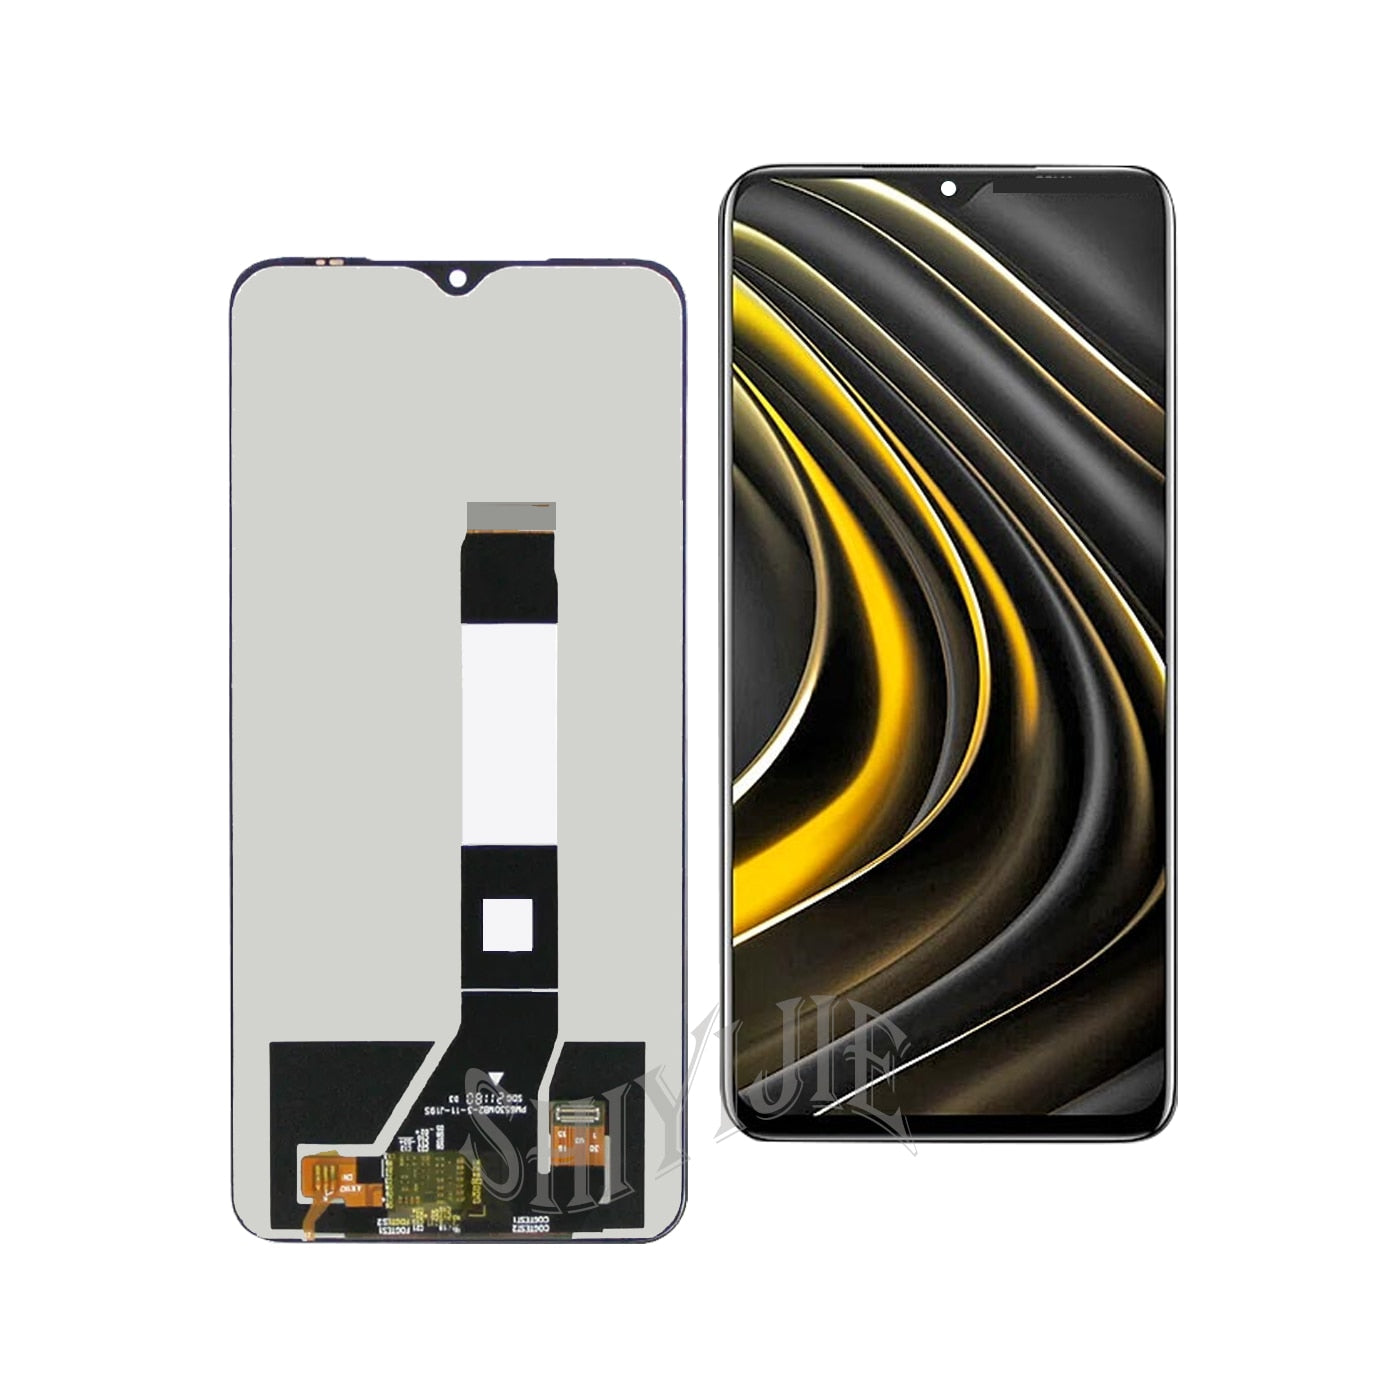 6.53" Original LCD For Xiaomi Redmi 9T LCD J19S M2010J19SG M2010J19SY Display Touch Screen For POCO M3 Digitizer Assembly Tested